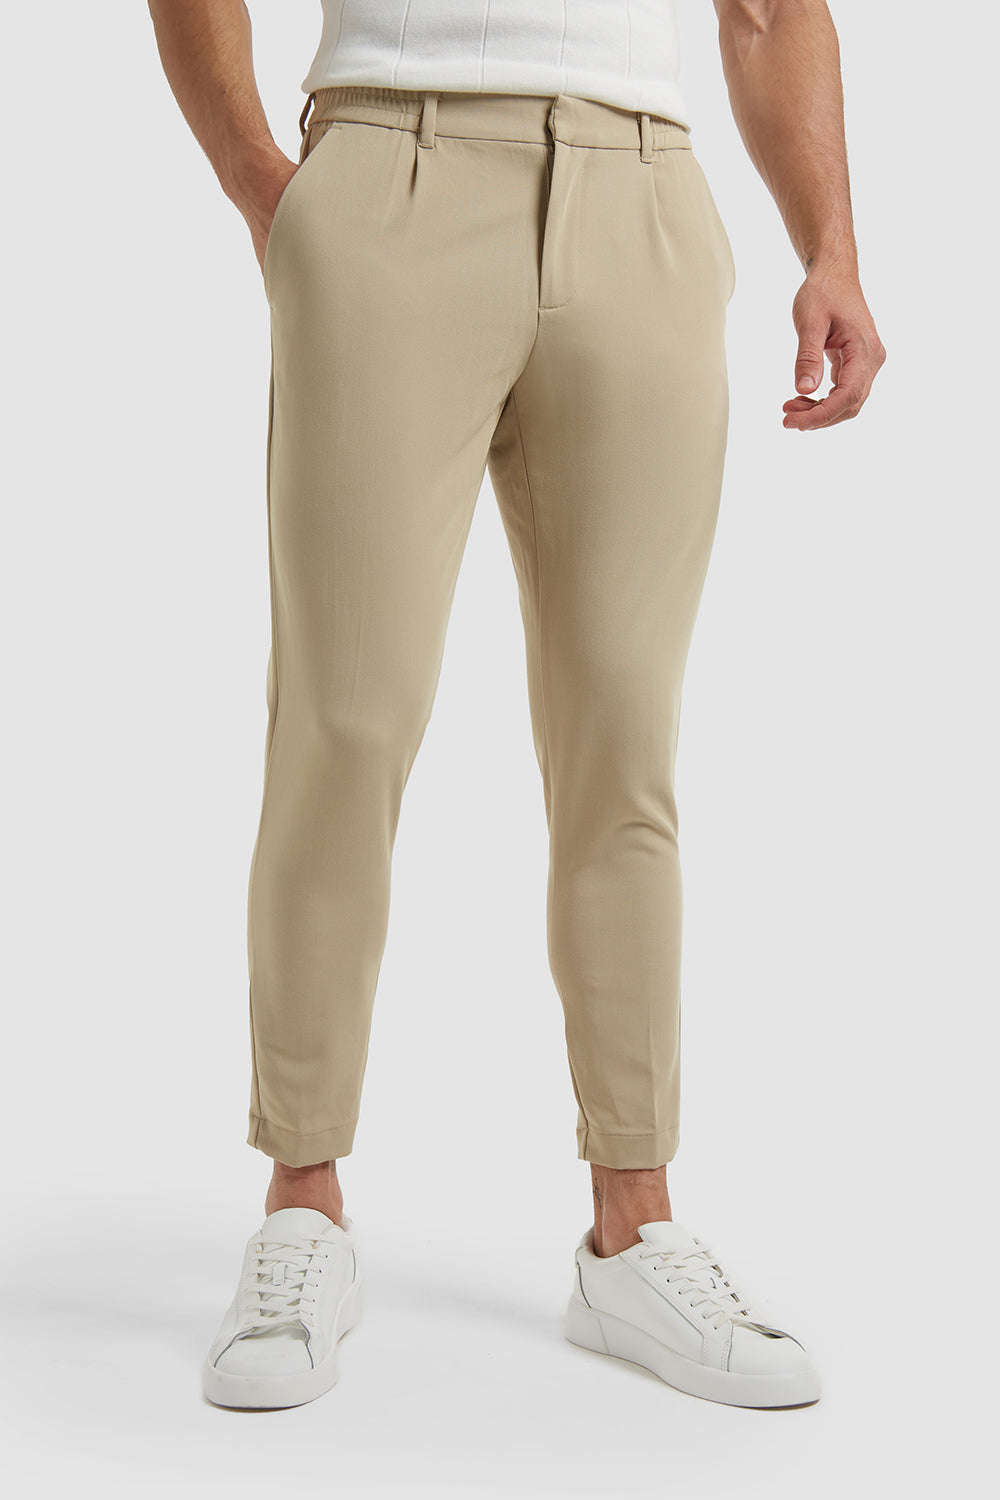 Cropped Pleated Trouser in Stone - TAILORED ATHLETE - ROW